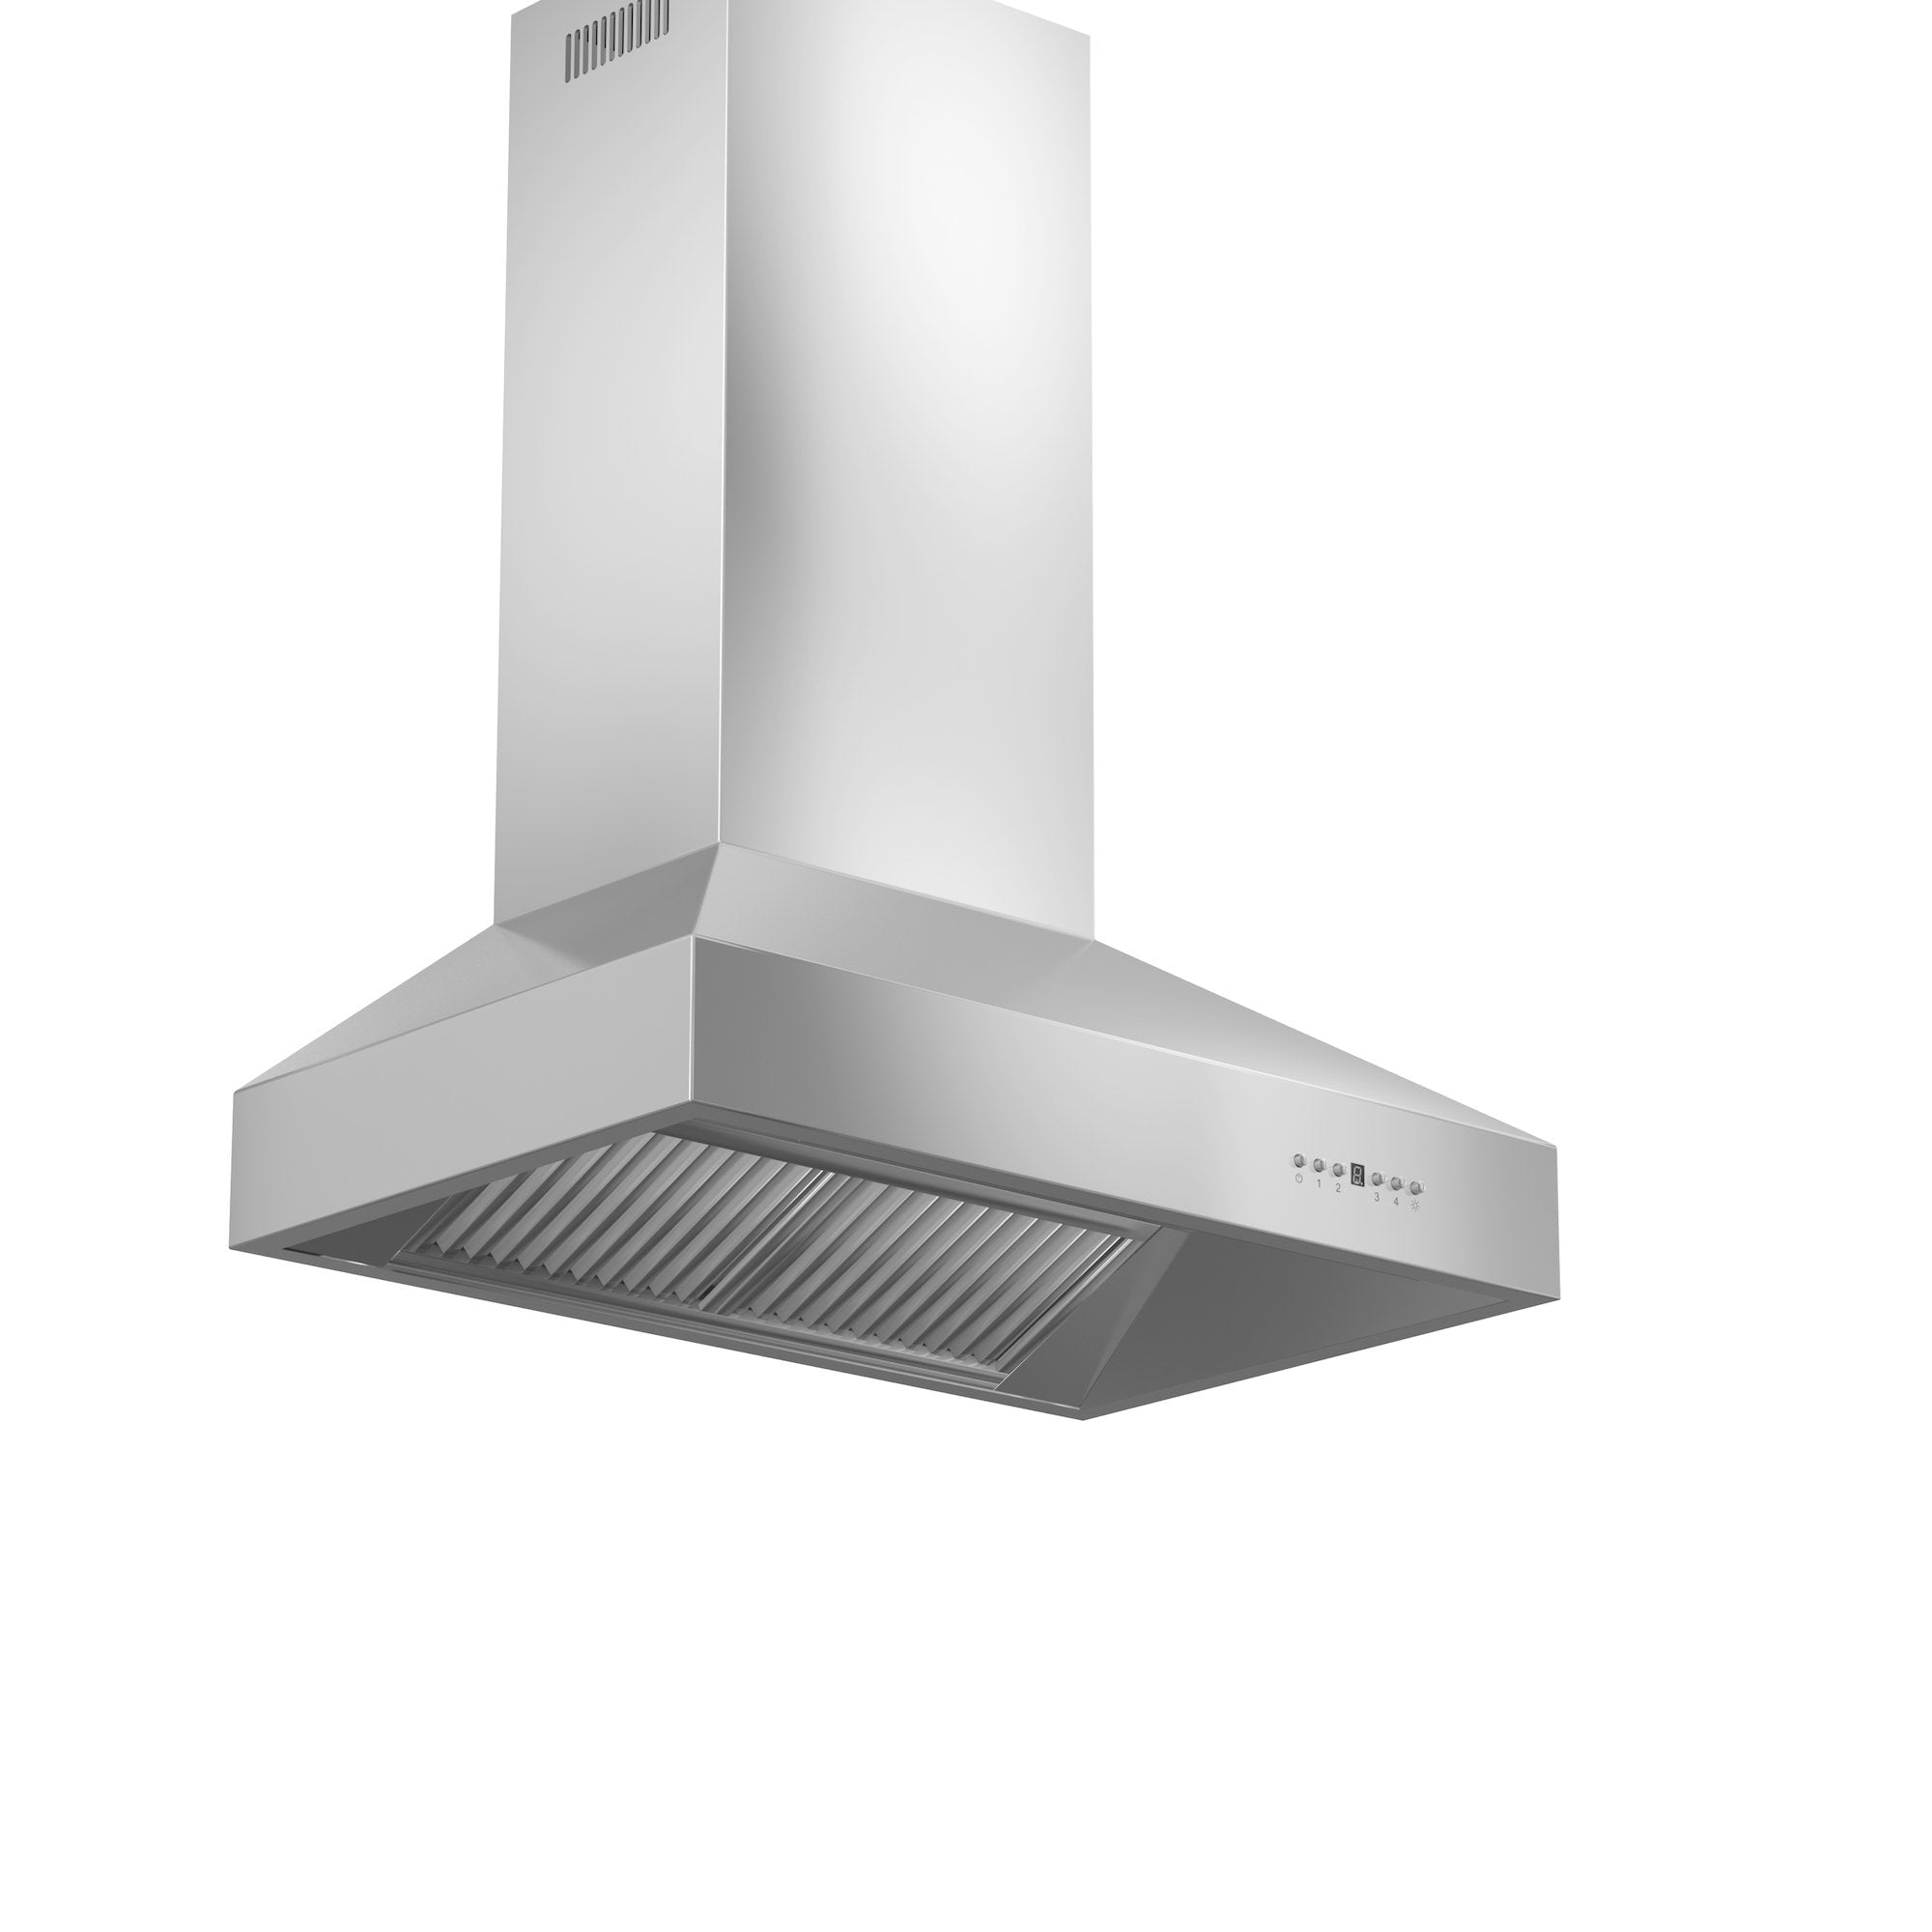 ZLINE Ducted Wall Mount Range Hood in Outdoor Approved Stainless Steel (697-304) side from below.